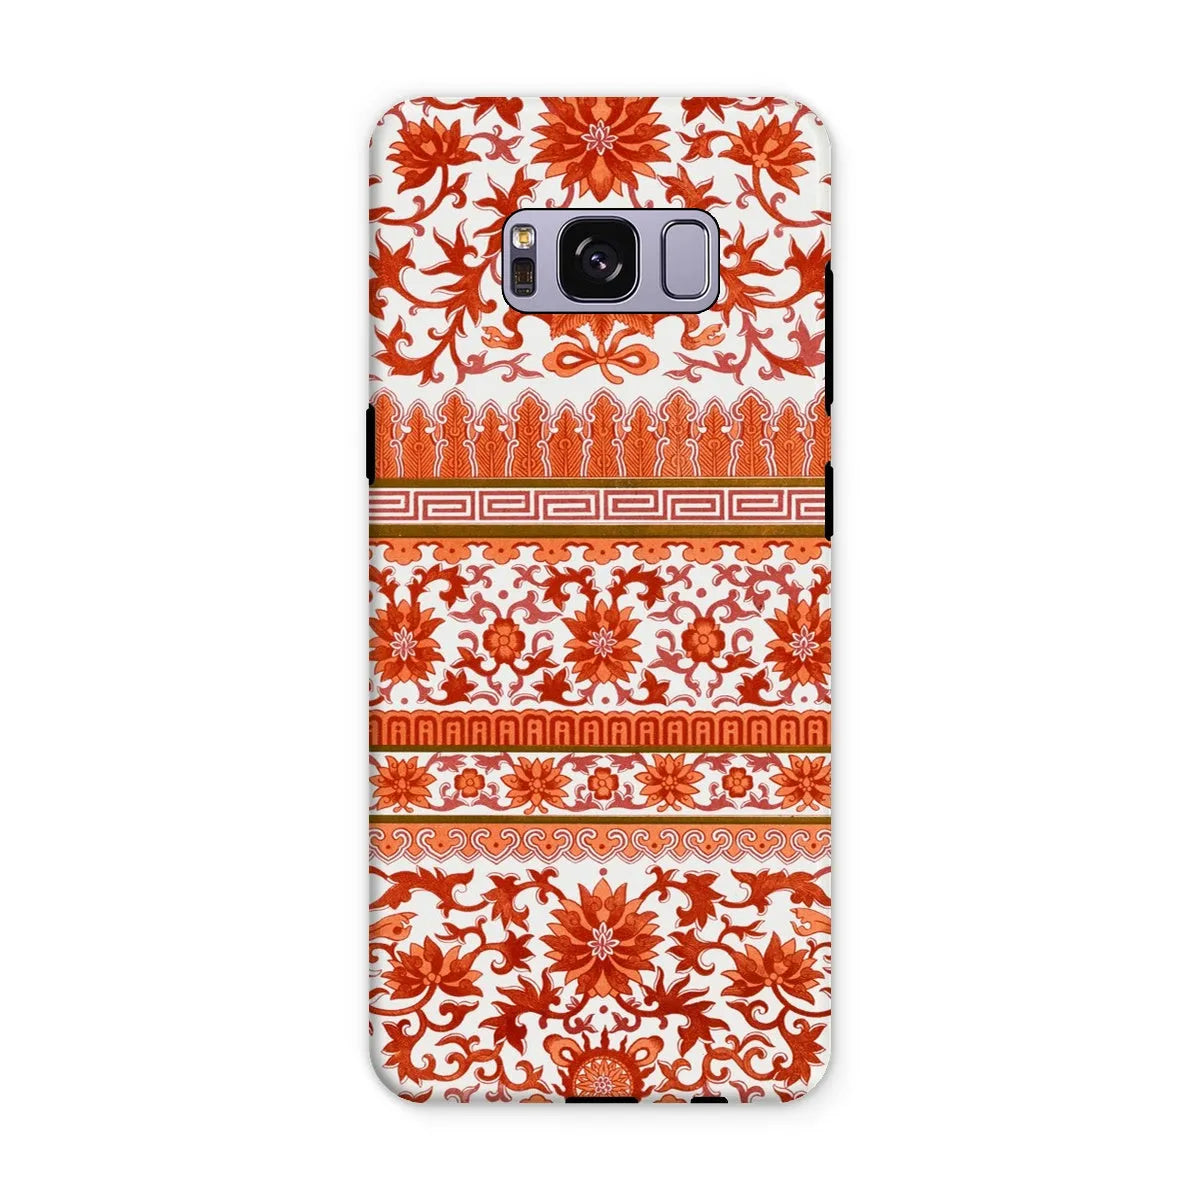 Fiery Chinese Floral Aesthetic Art Phone Case - Owen Jones - Samsung Galaxy S8 Plus / Matte - Mobile Phone Cases